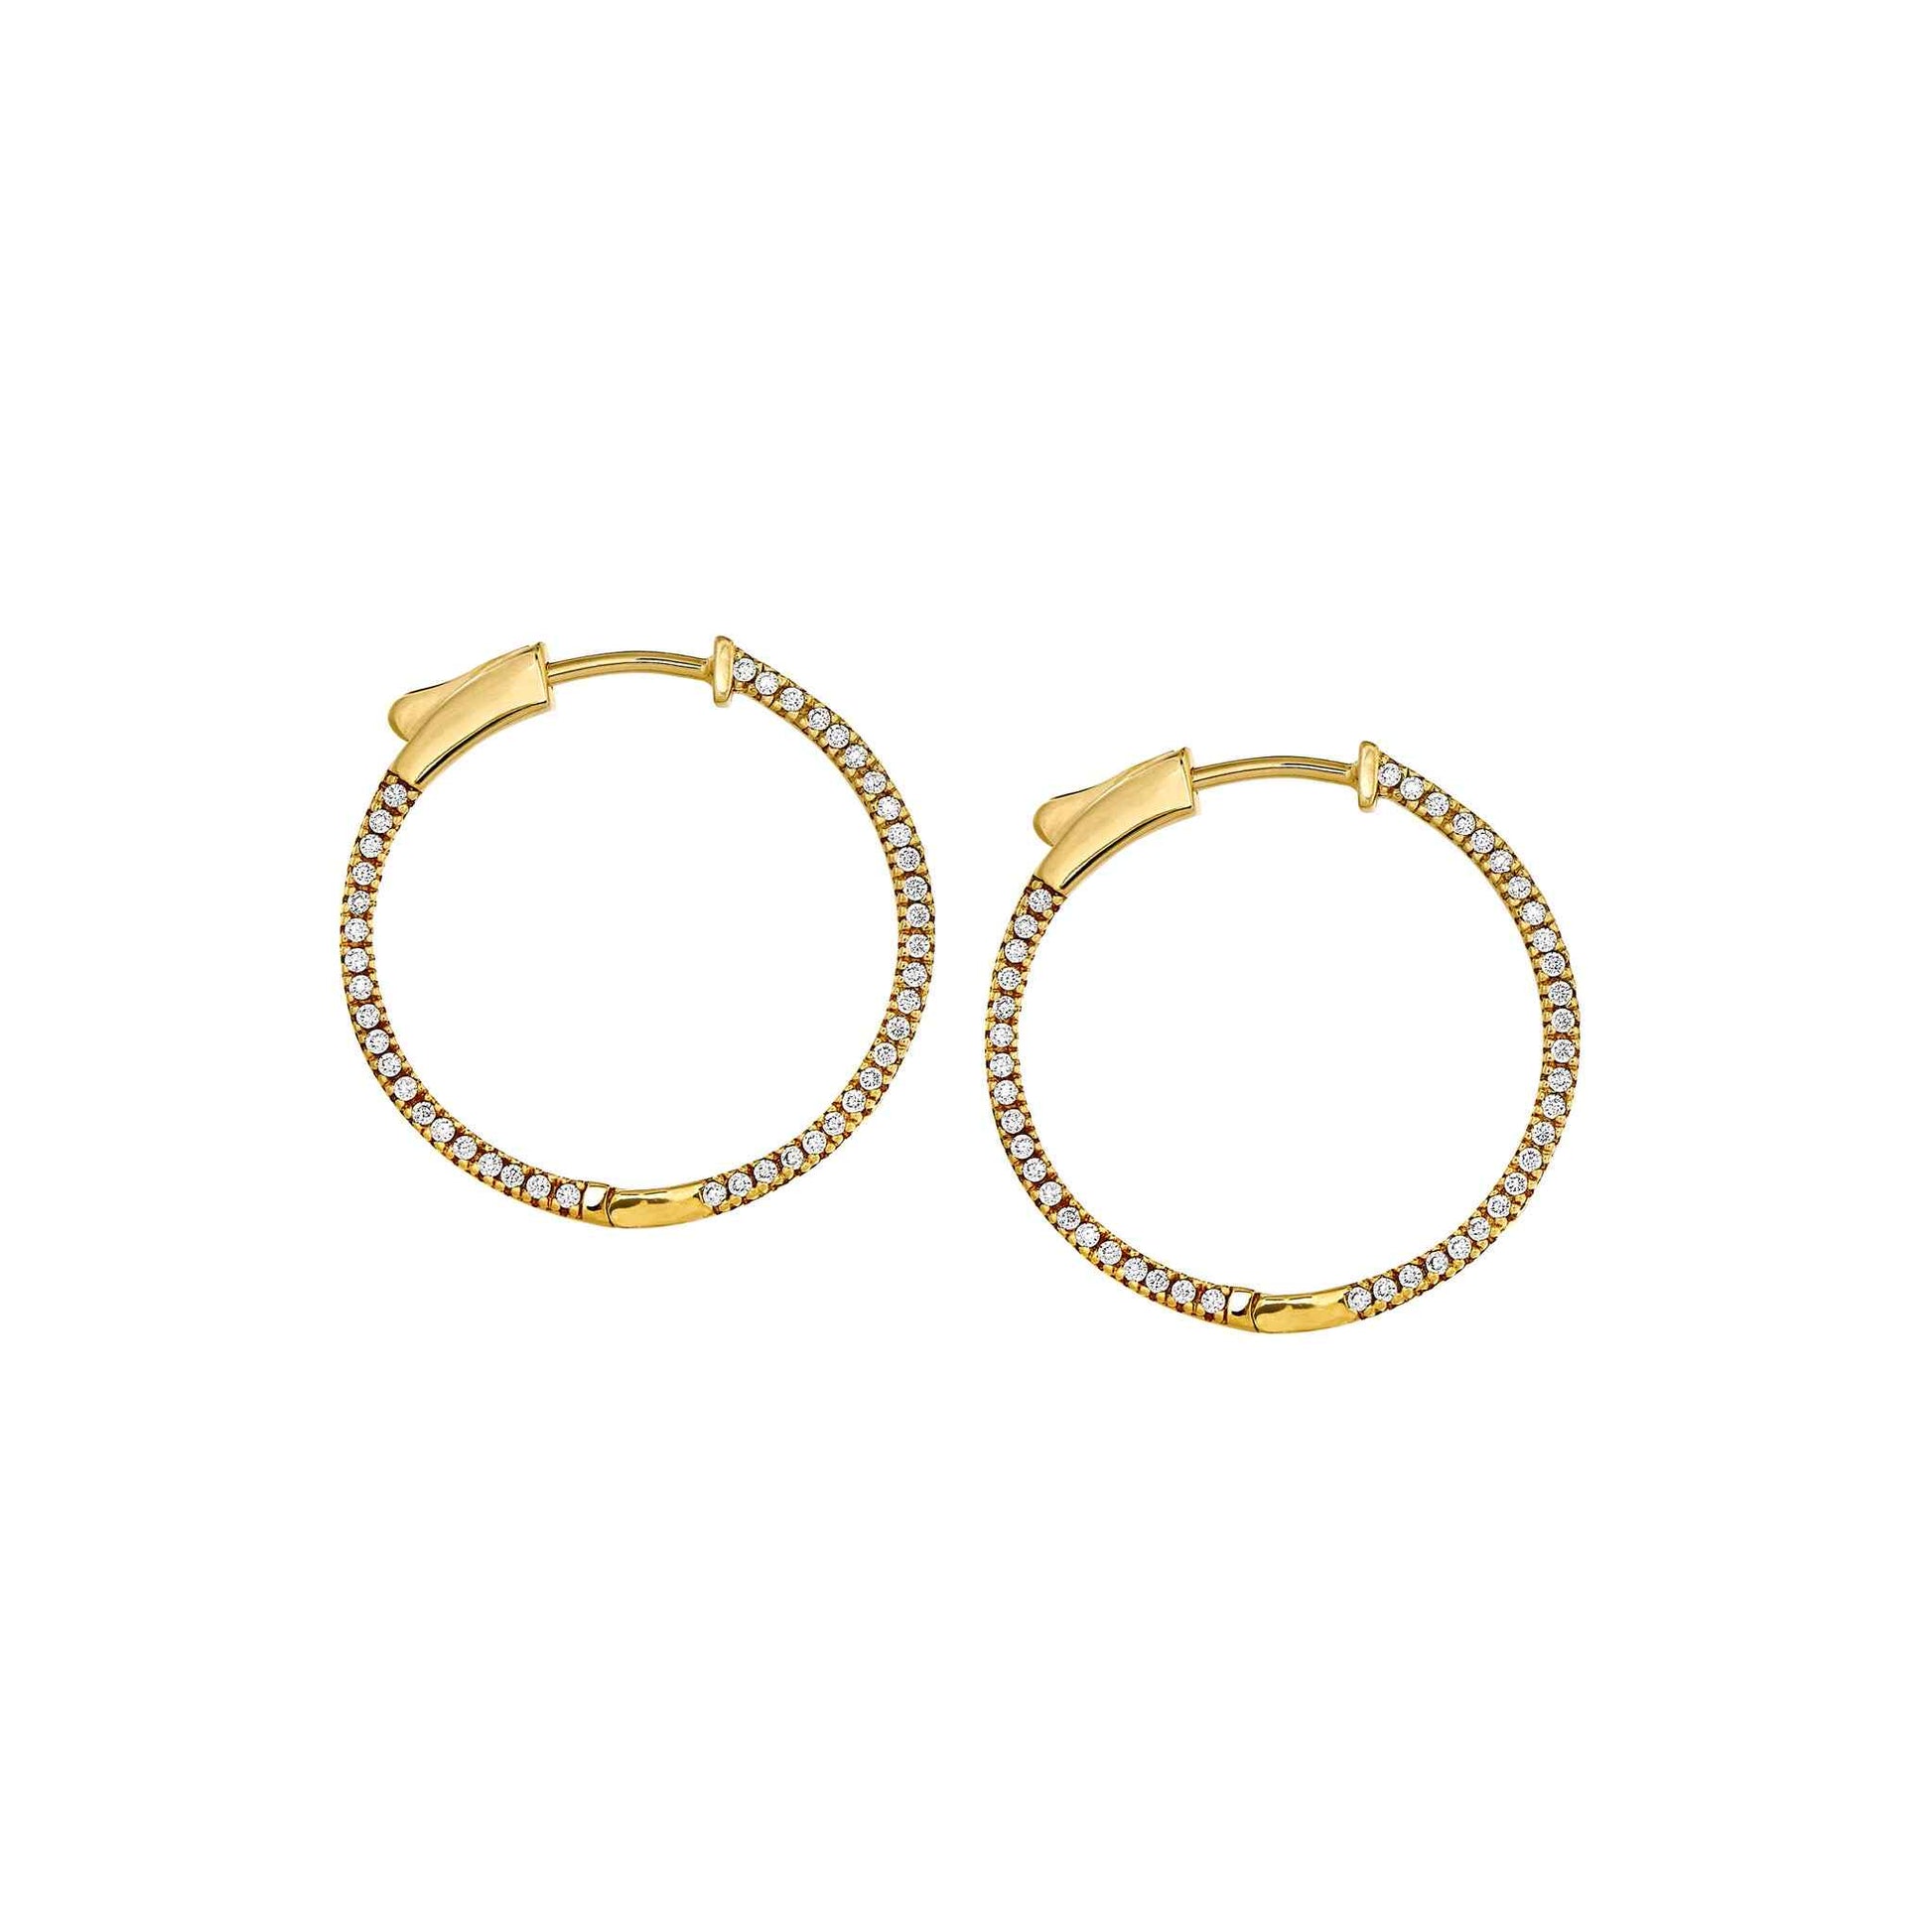 A side stone medium hoop earrings with simulated diamonds displayed on a neutral white background.